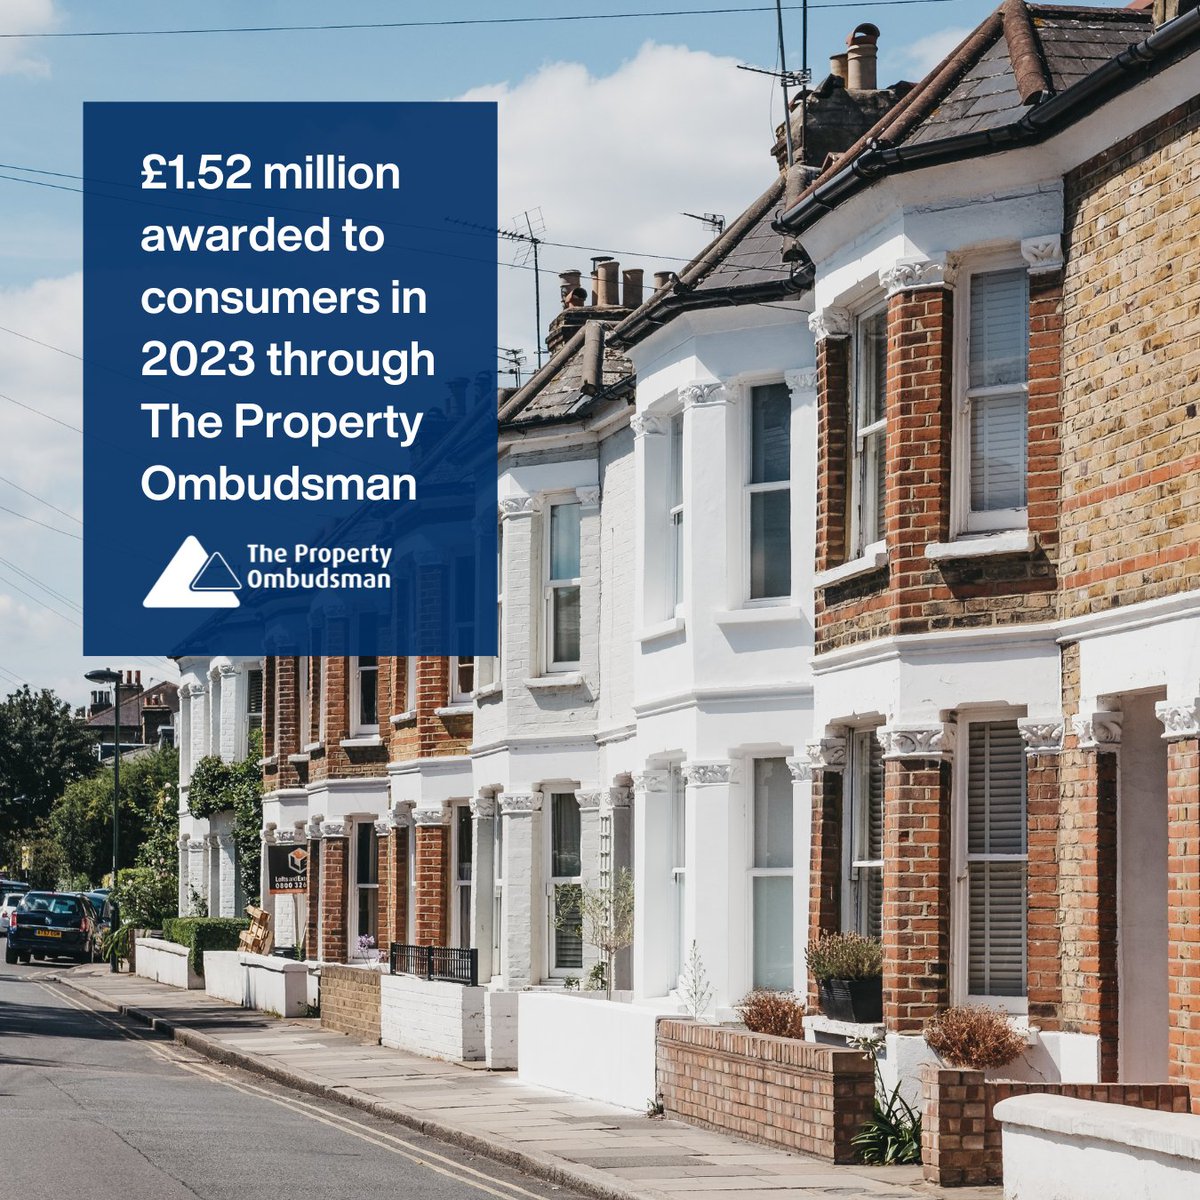 In 2023, a total of £1.52 million was awarded to consumers through The Property Ombudsman. Our full Annual Review is coming soon, with further details of our performance, data and cases we've resolved.